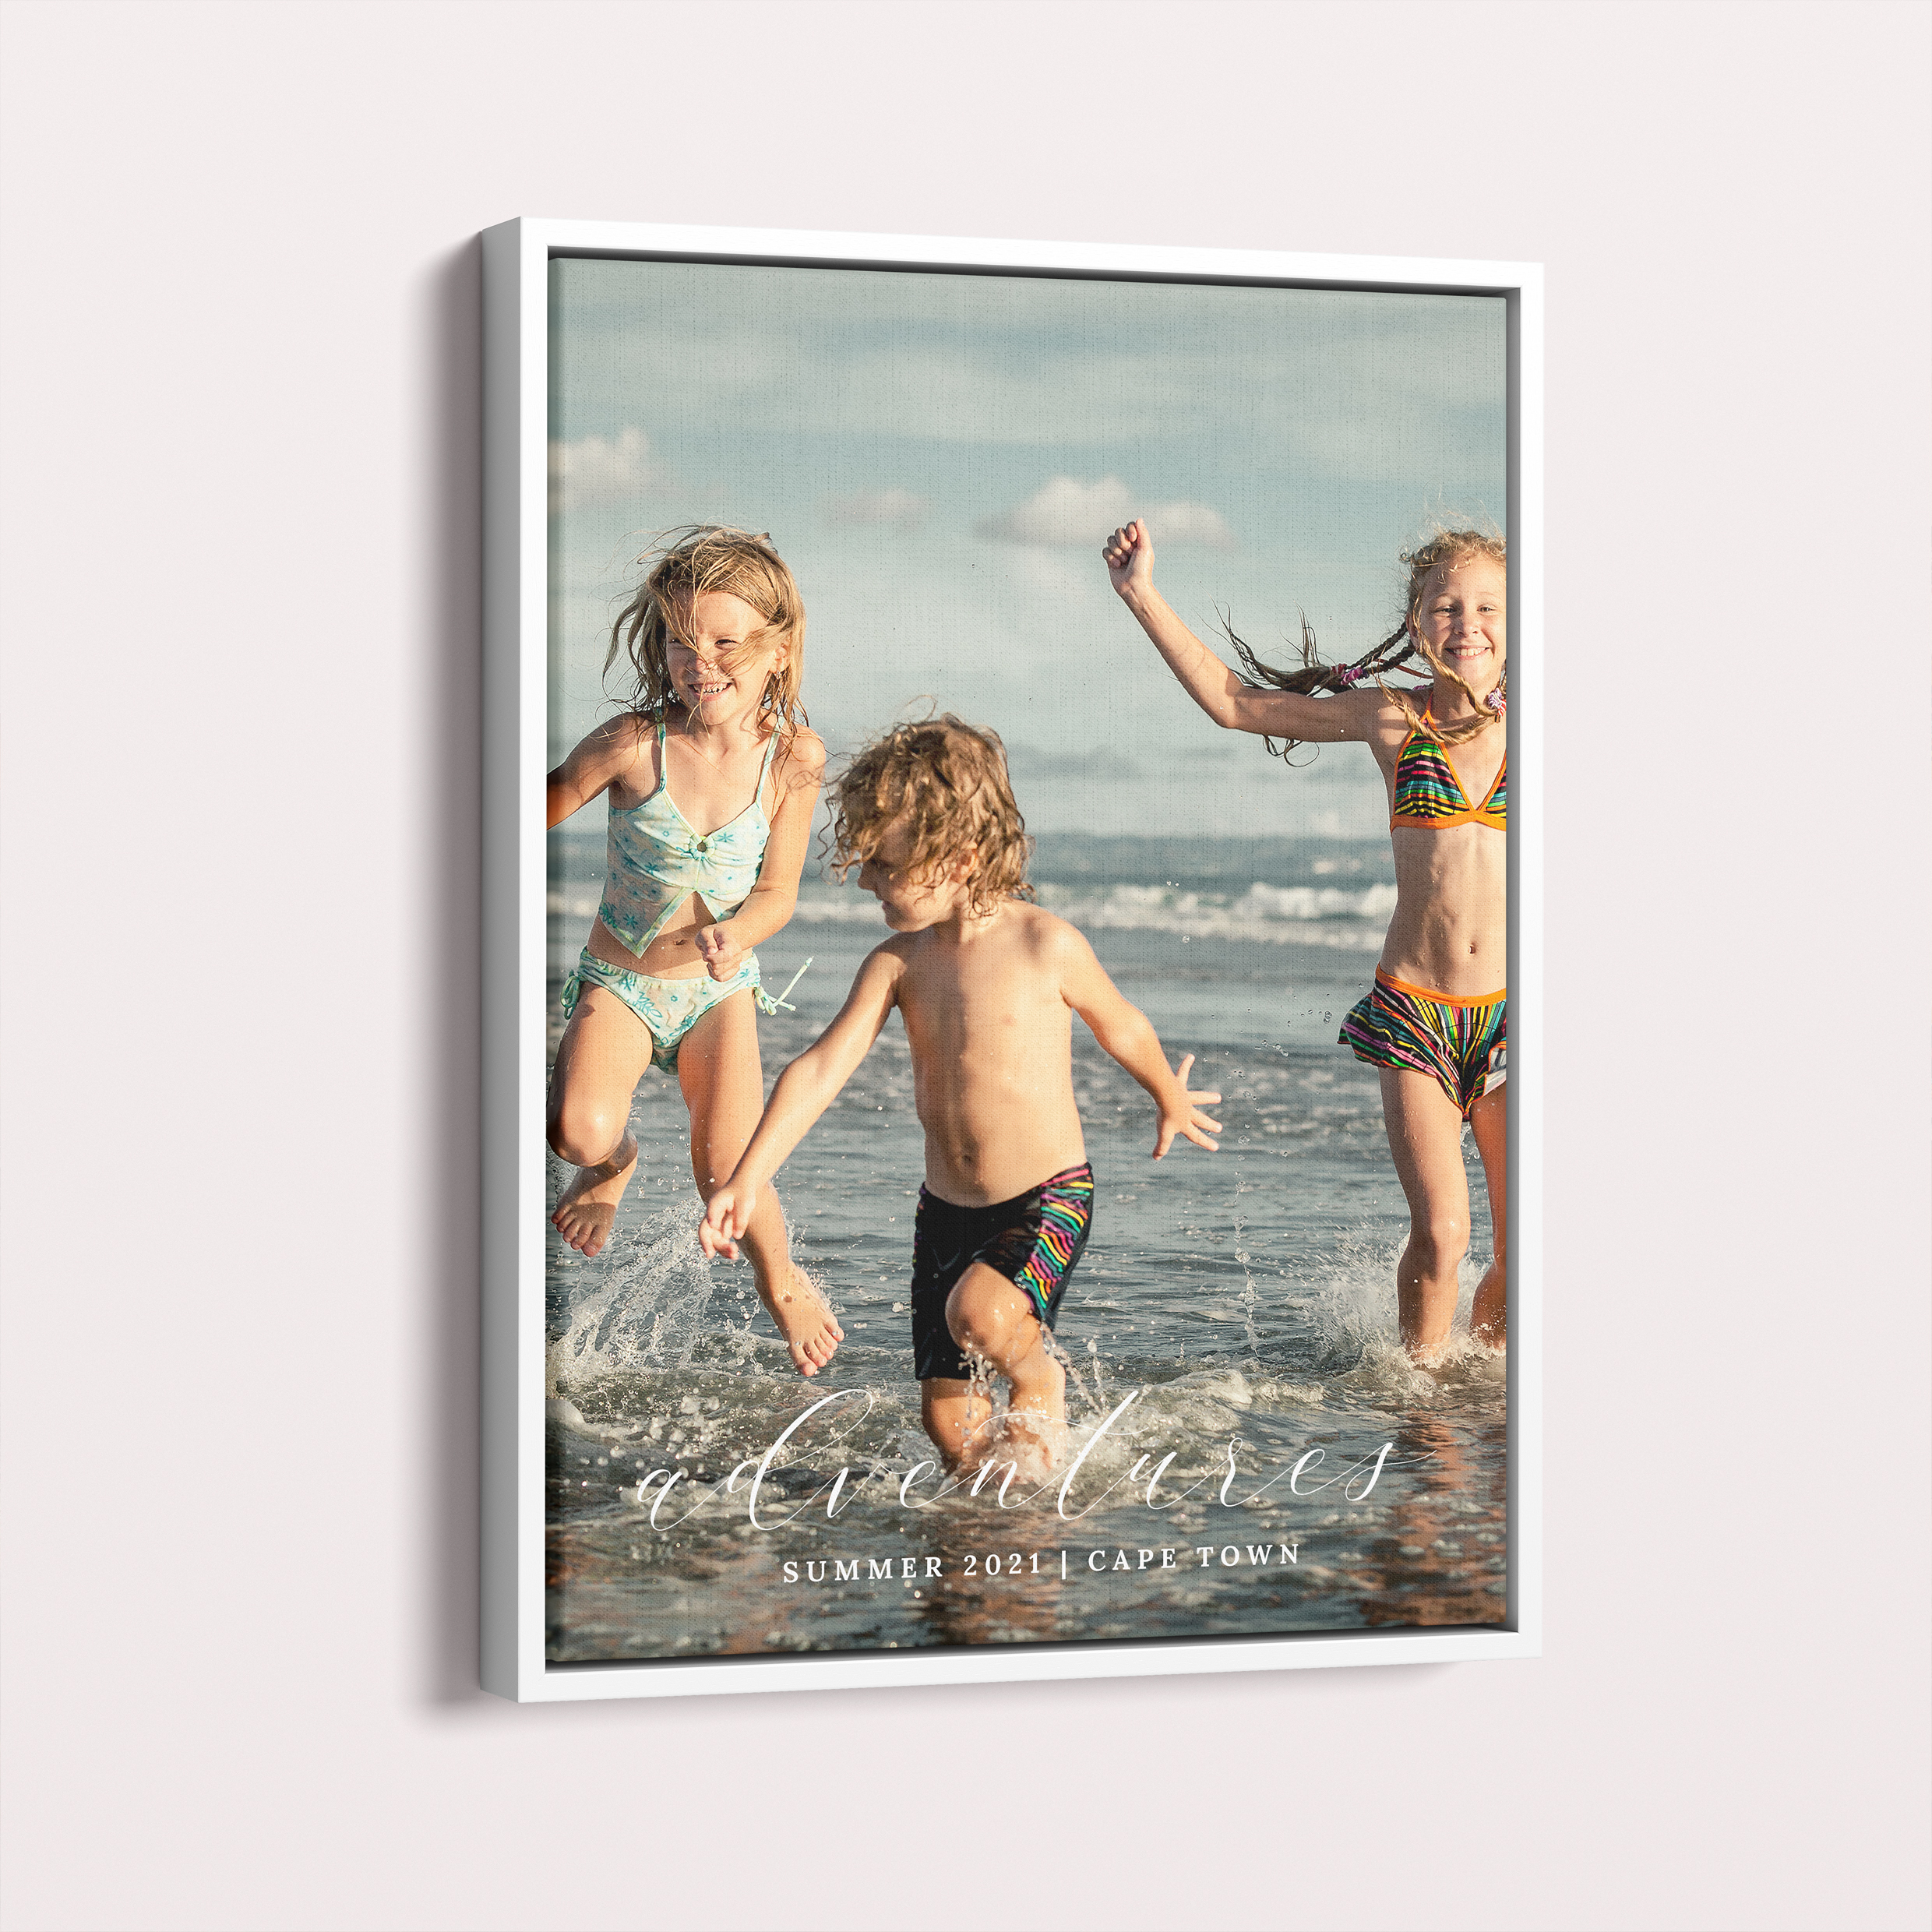 Personalised Adventures Framed Photo Canvas - Embark on a nostalgic journey with customizable memories